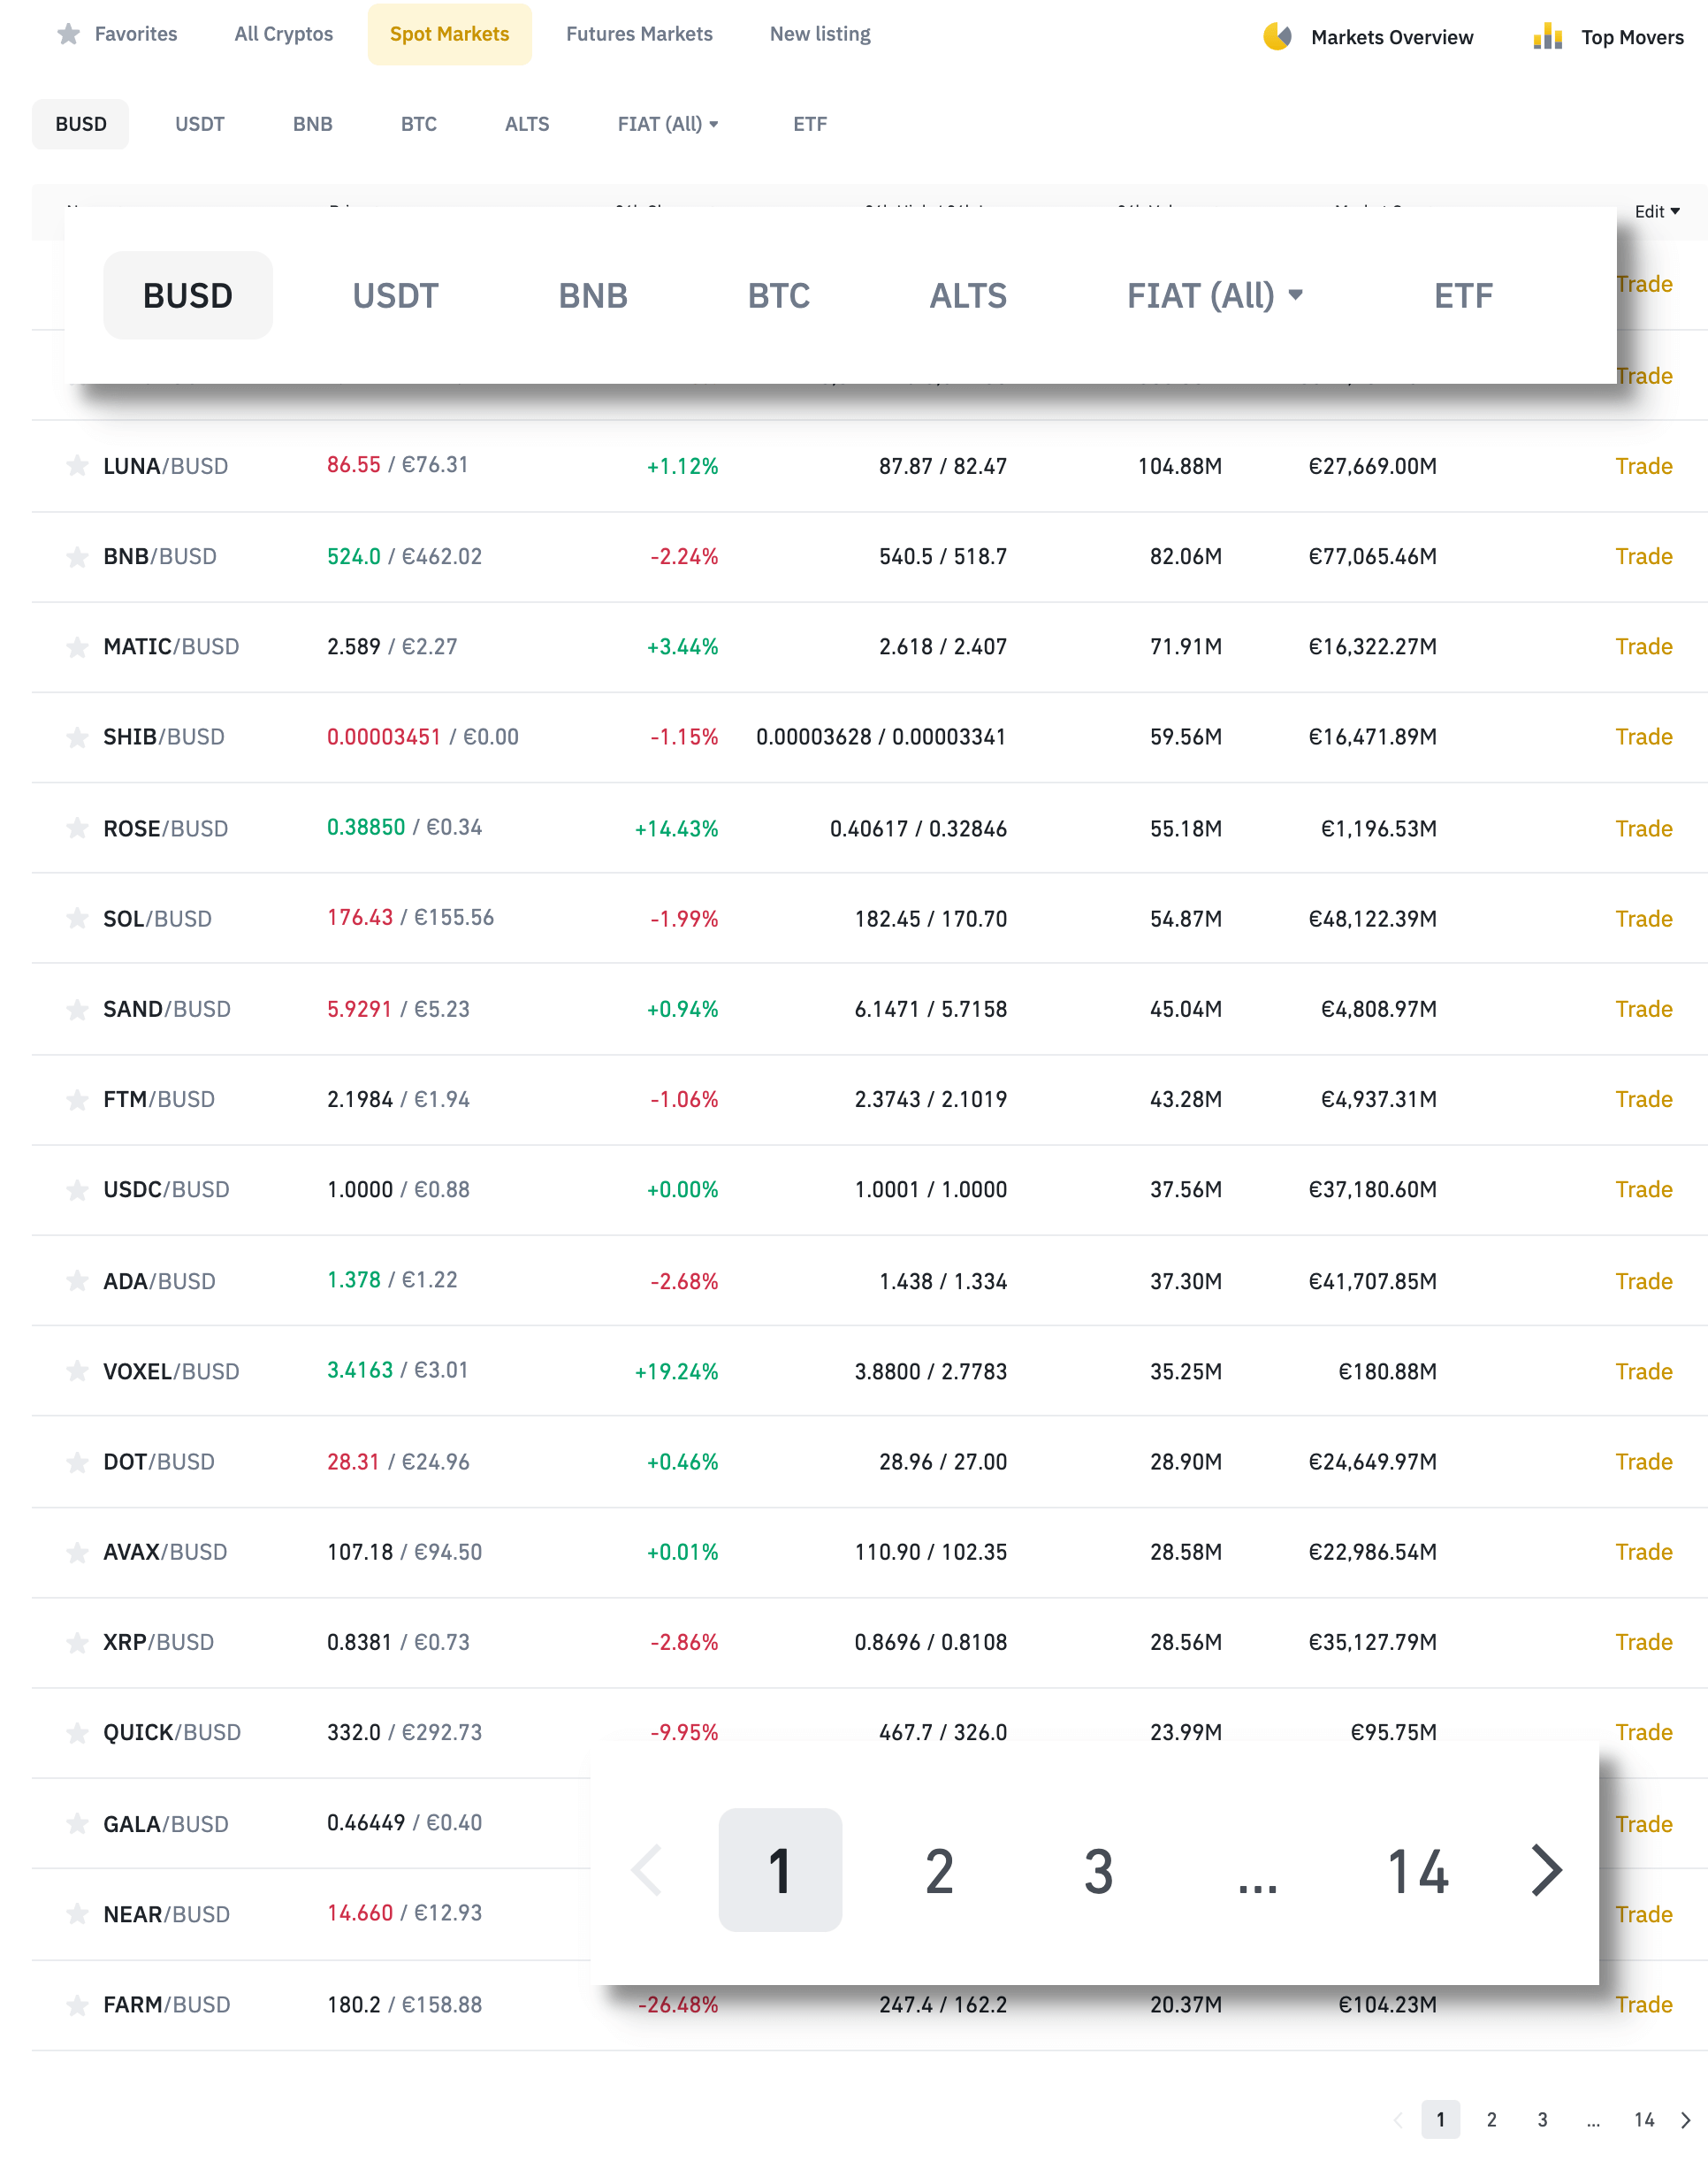 View of Binance trading pairs for the spot market. It can be seen that there are trading pairs for BUSD, USDT, BNB, BTC, ALTS, FIAT and ETF. For BUSD alone, there are 14 pages with 20 trading pairs each.